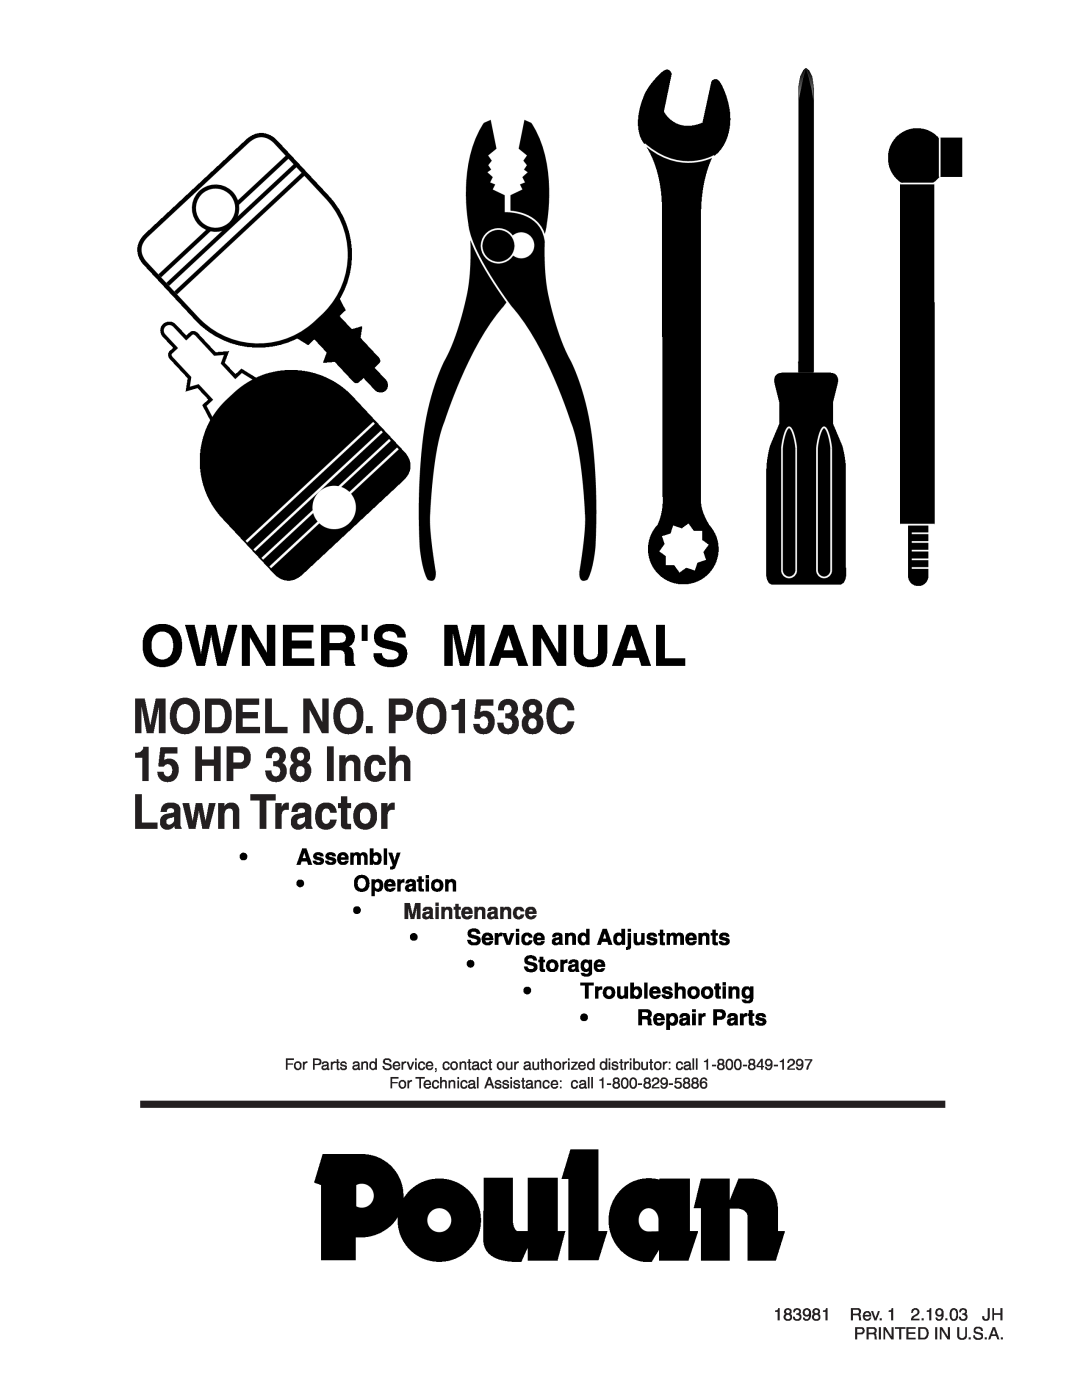 Poulan manual MODEL NO. PO1538C 15 HP 38 Inch Lawn Tractor, 183981 Rev. 1 2.19.03 JH PRINTED IN U.S.A 